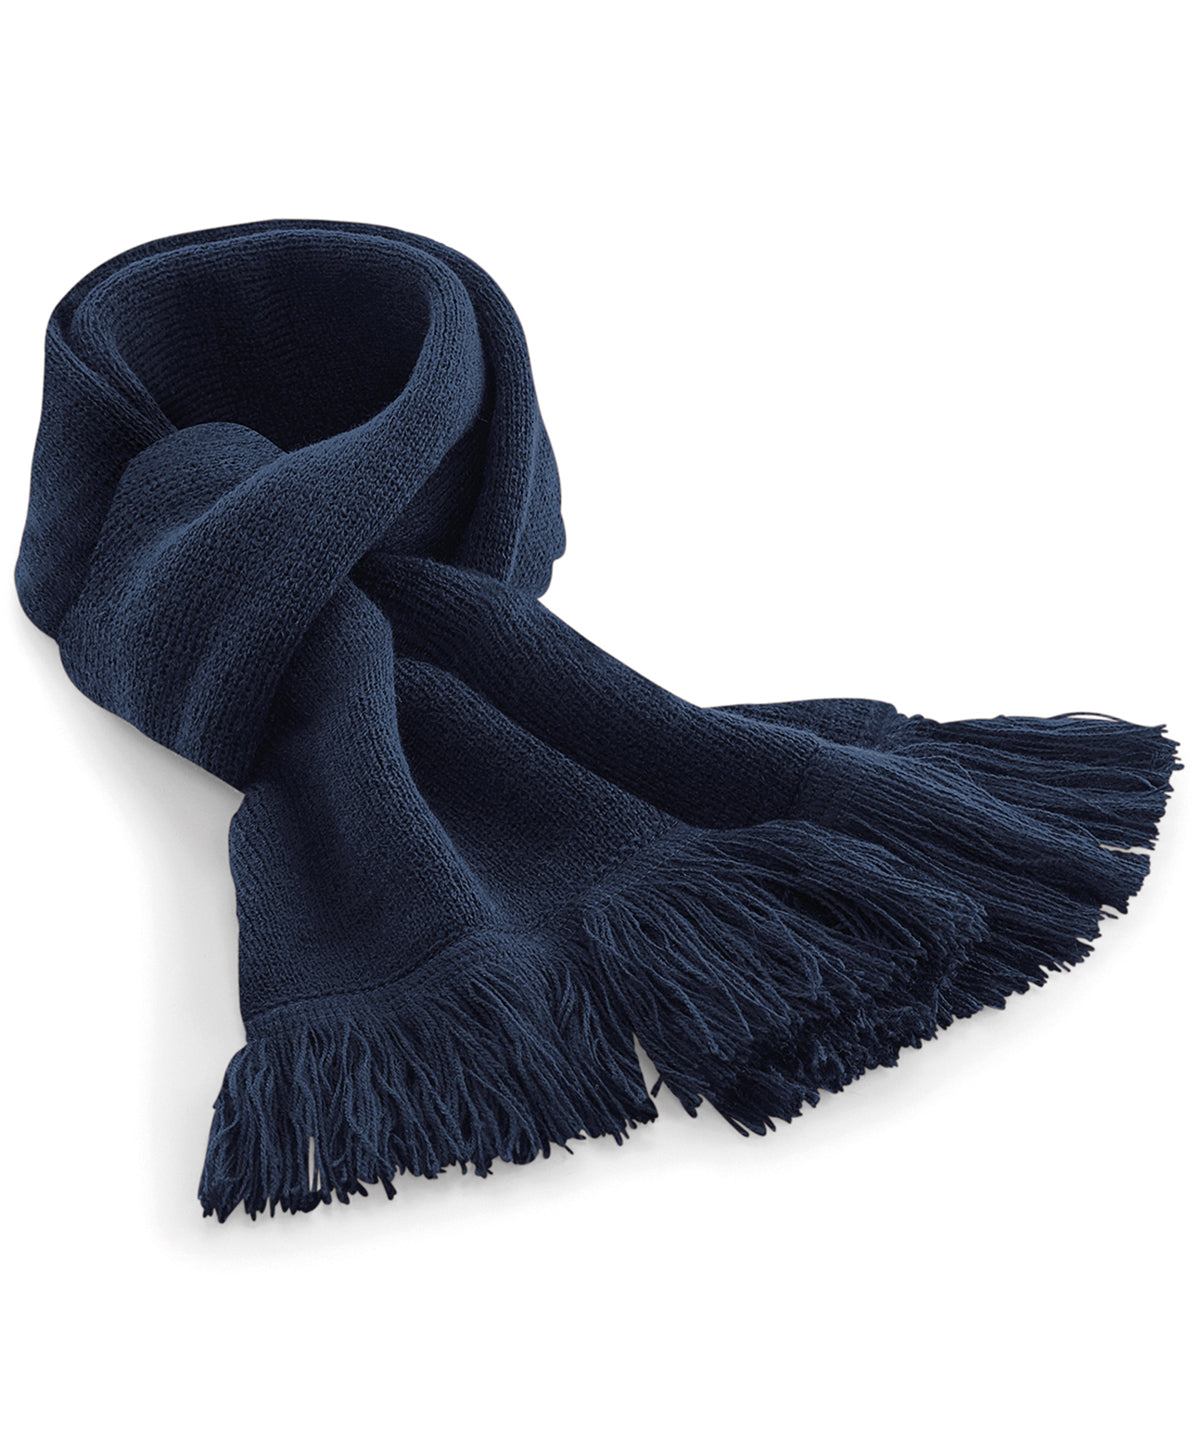 Personalised Scarves - Navy Beechfield Classic knitted scarf